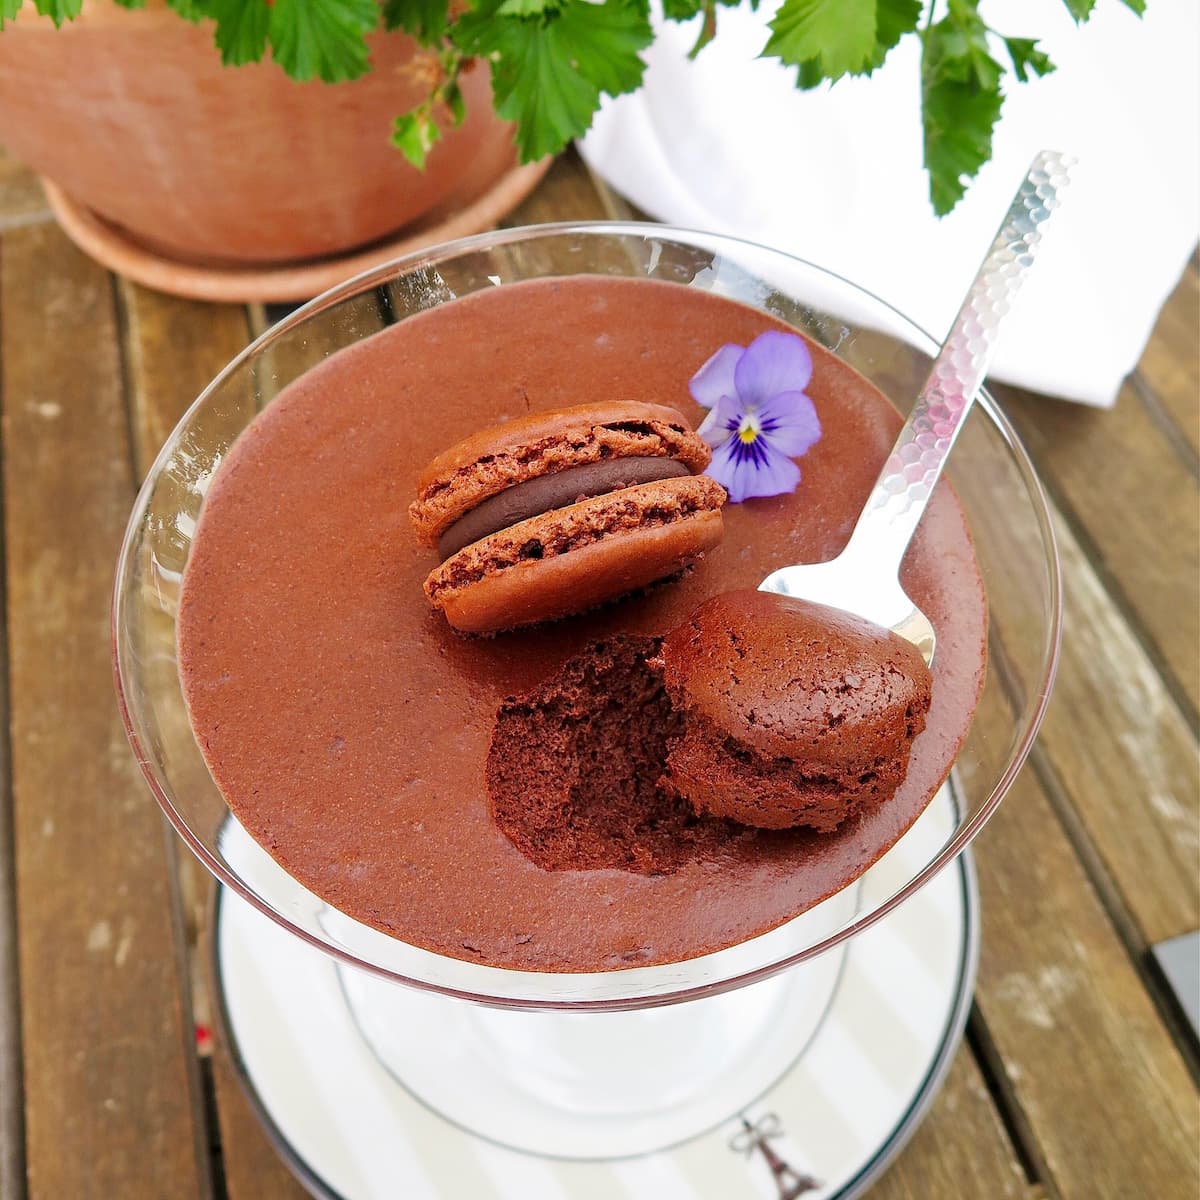 spoonful of chocolate mousse with a chocolate macaron on top and edible pansy